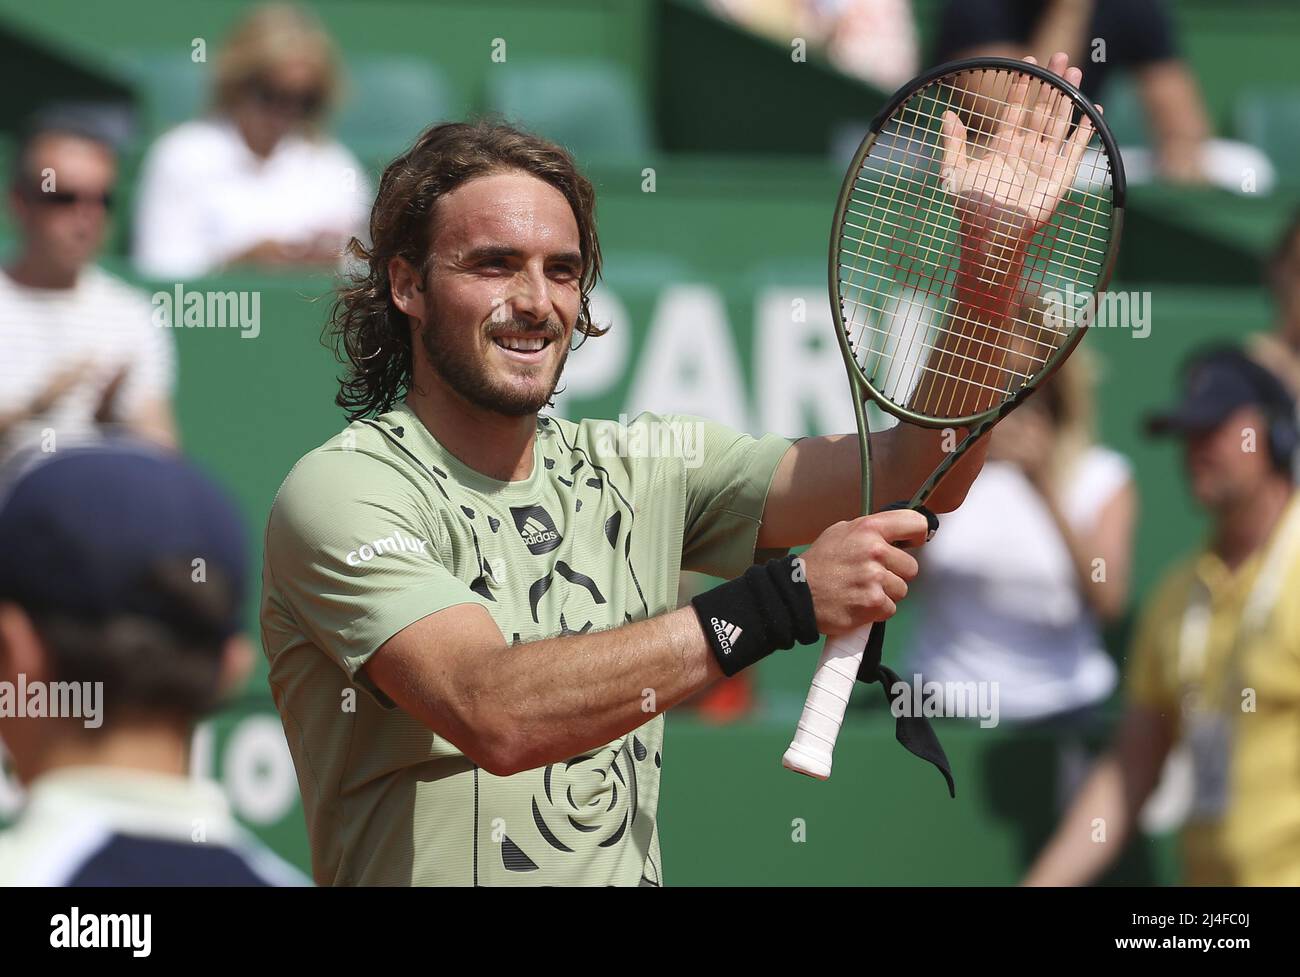 Stefanos Tsitsipas of Greece celebrates his victory during day 5 of the Rolex Monte-Carlo Masters 2022, an ATP Masters 1000 tennis tournament on April 14, 2022, held at the Monte-Carlo Country Club